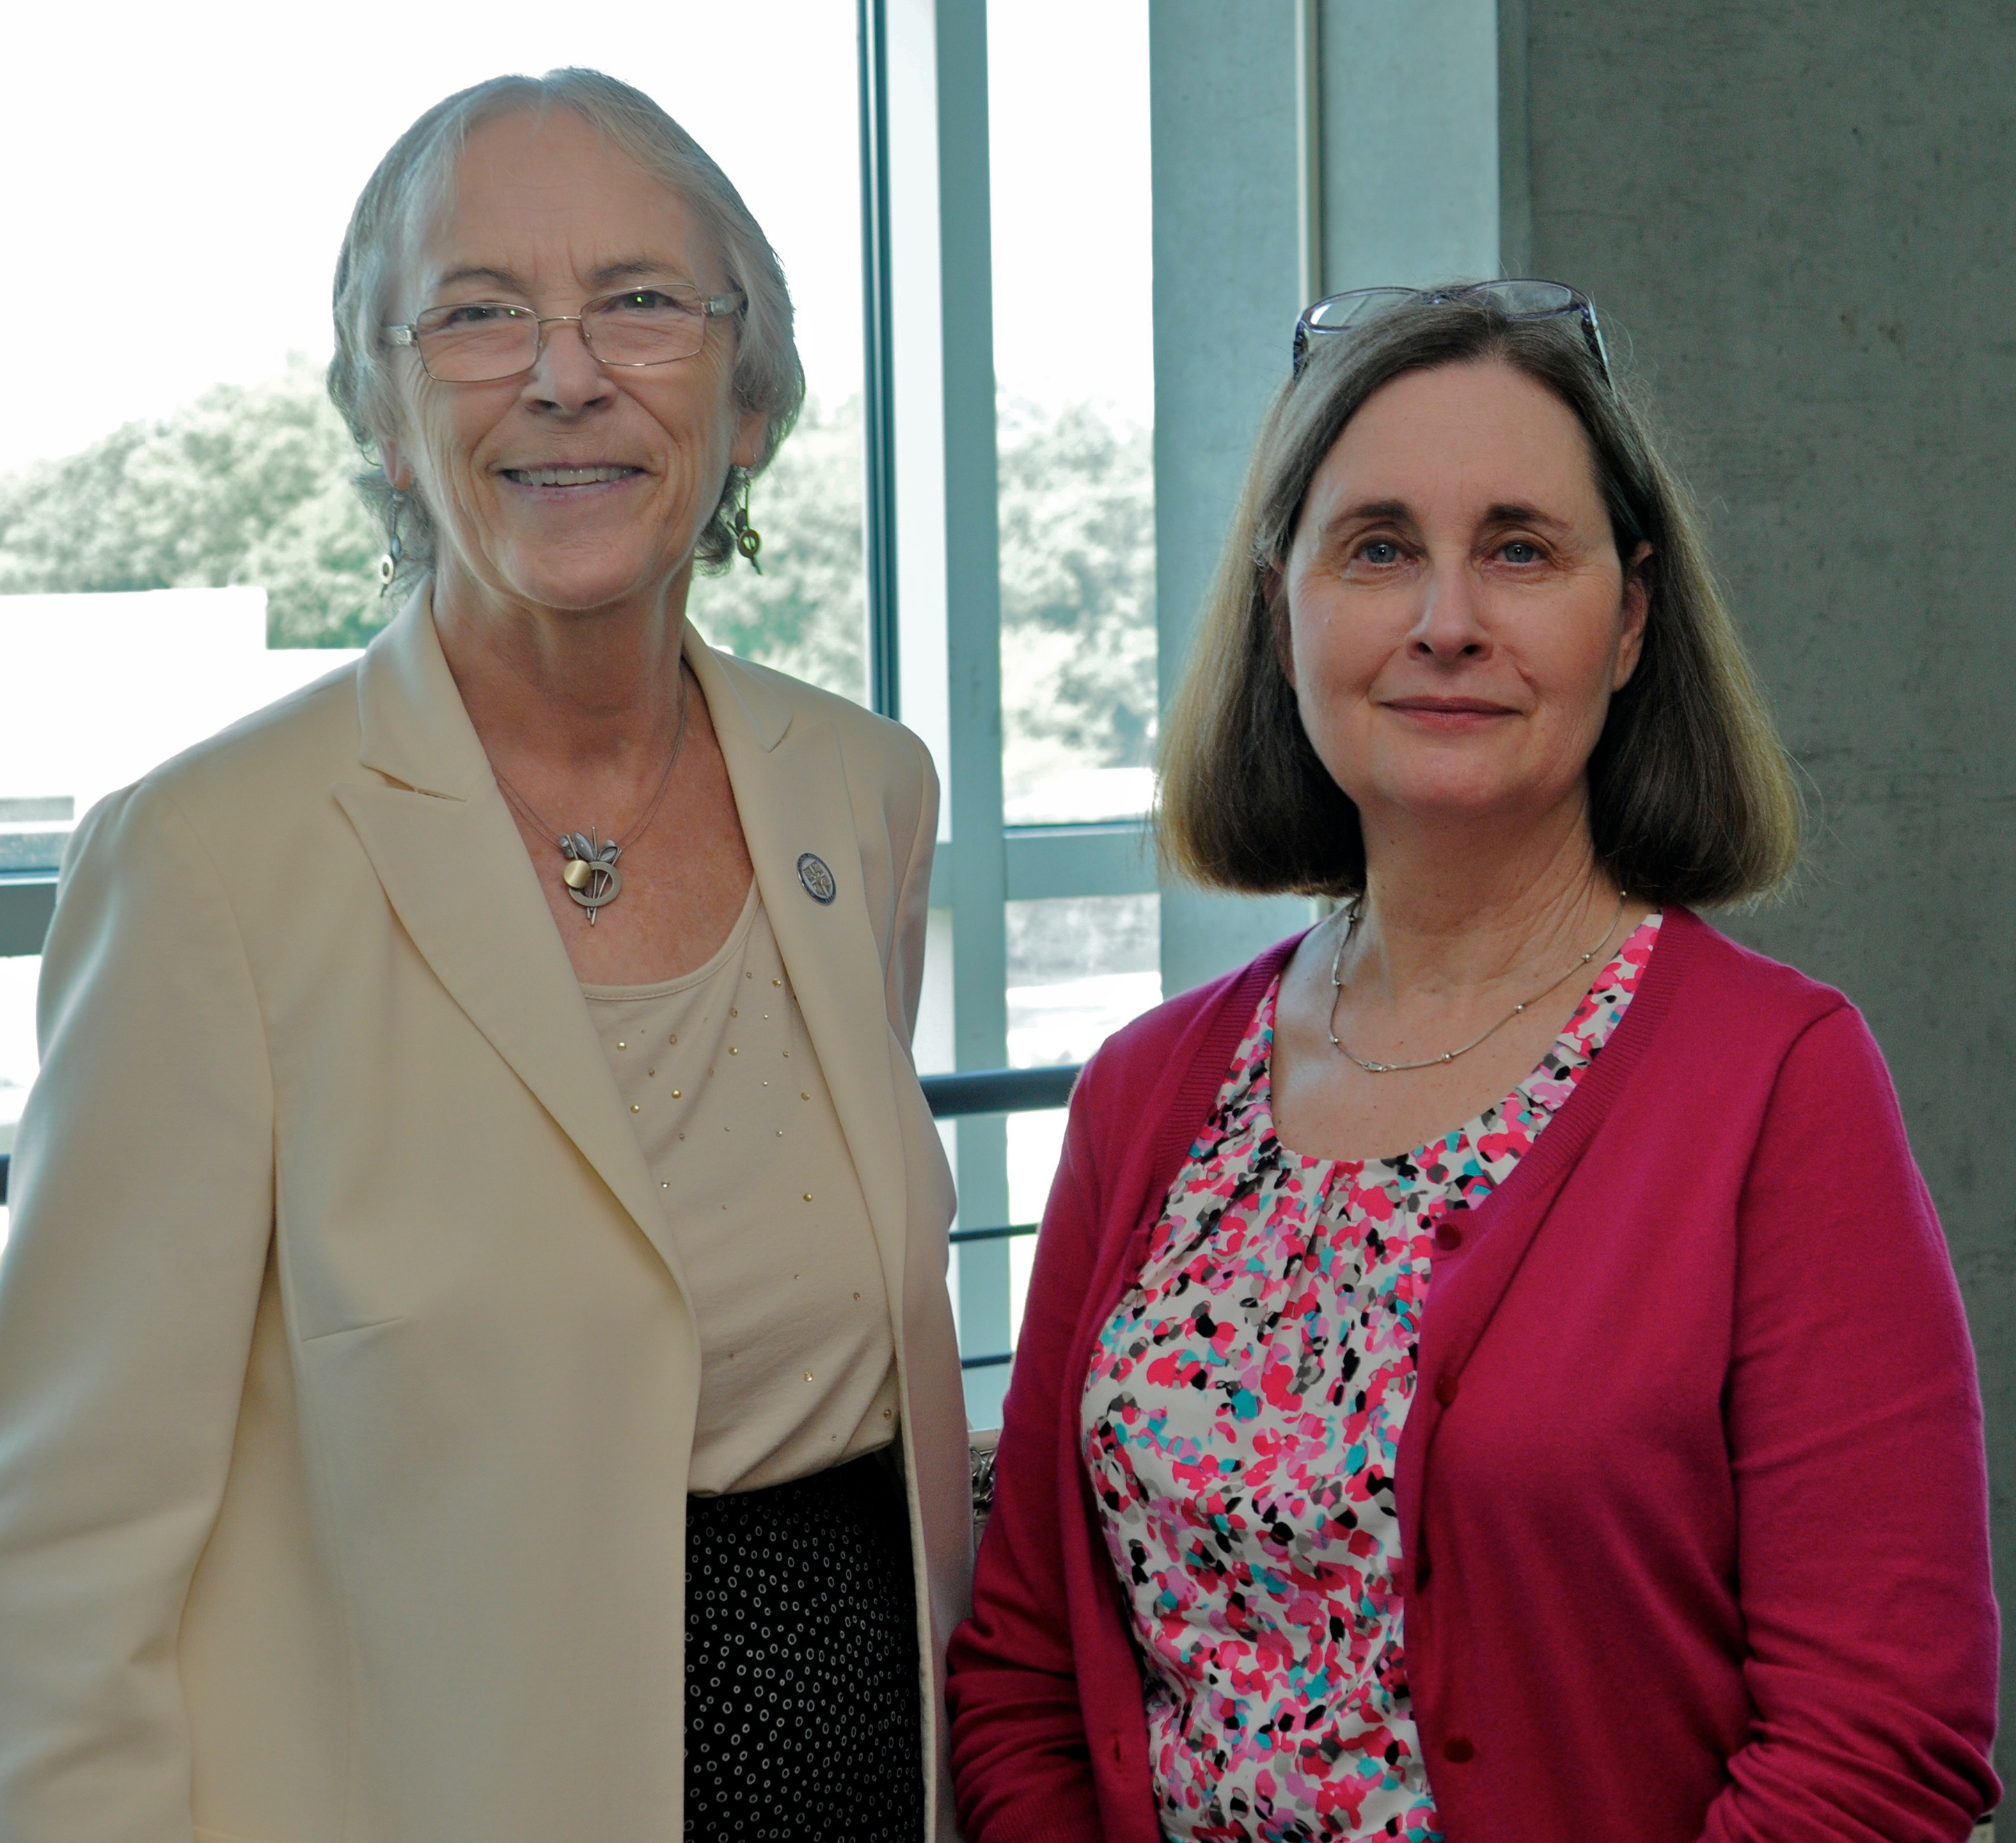 photo of ODU provost Carol Simpson with Virginia o'Herron at the later's retirement party